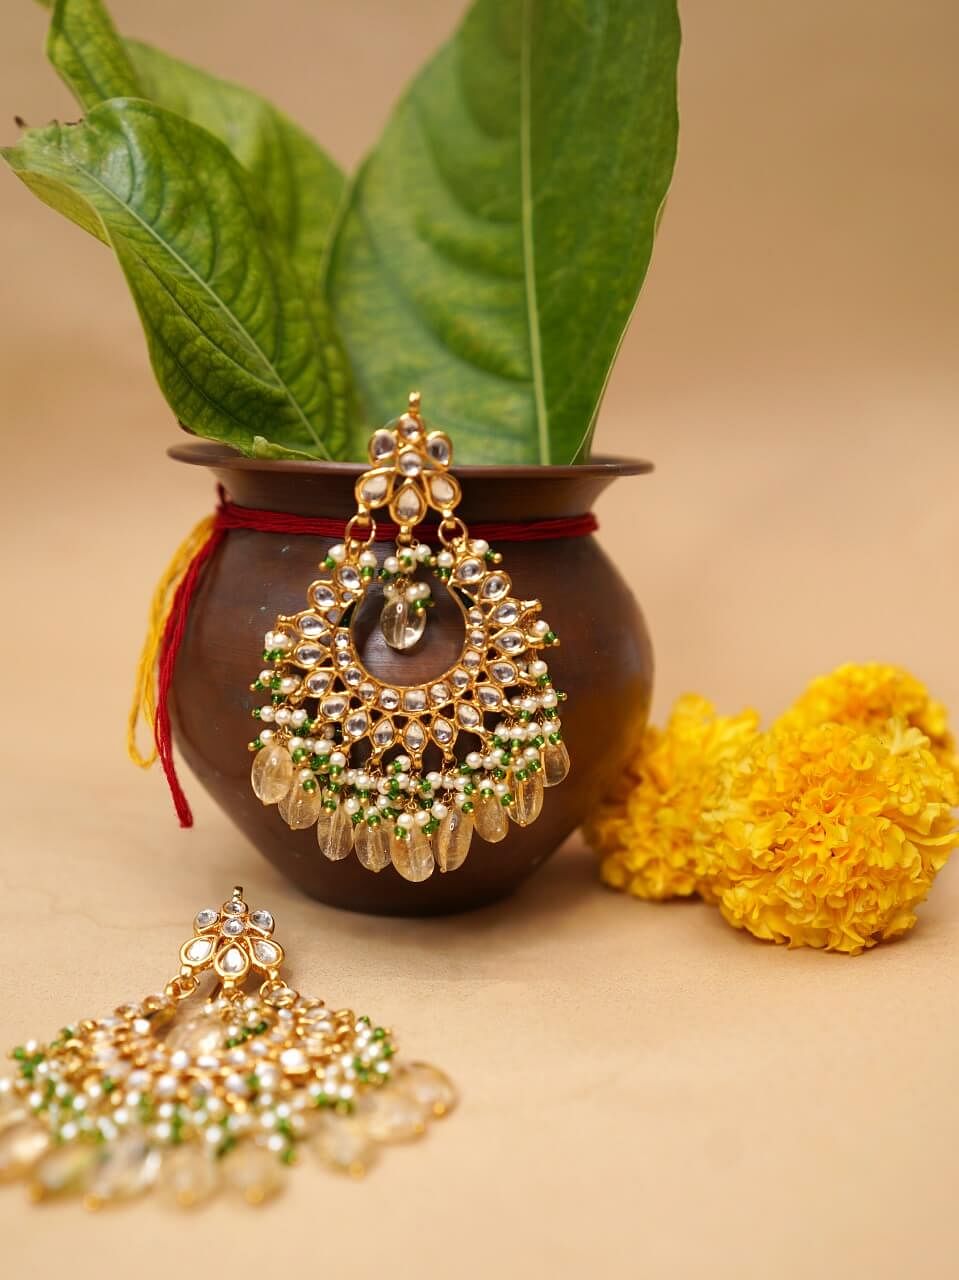 Kundan Party Wear Small Drop Earrings Traditional Indian wedding jewelry  For Her — Discovered